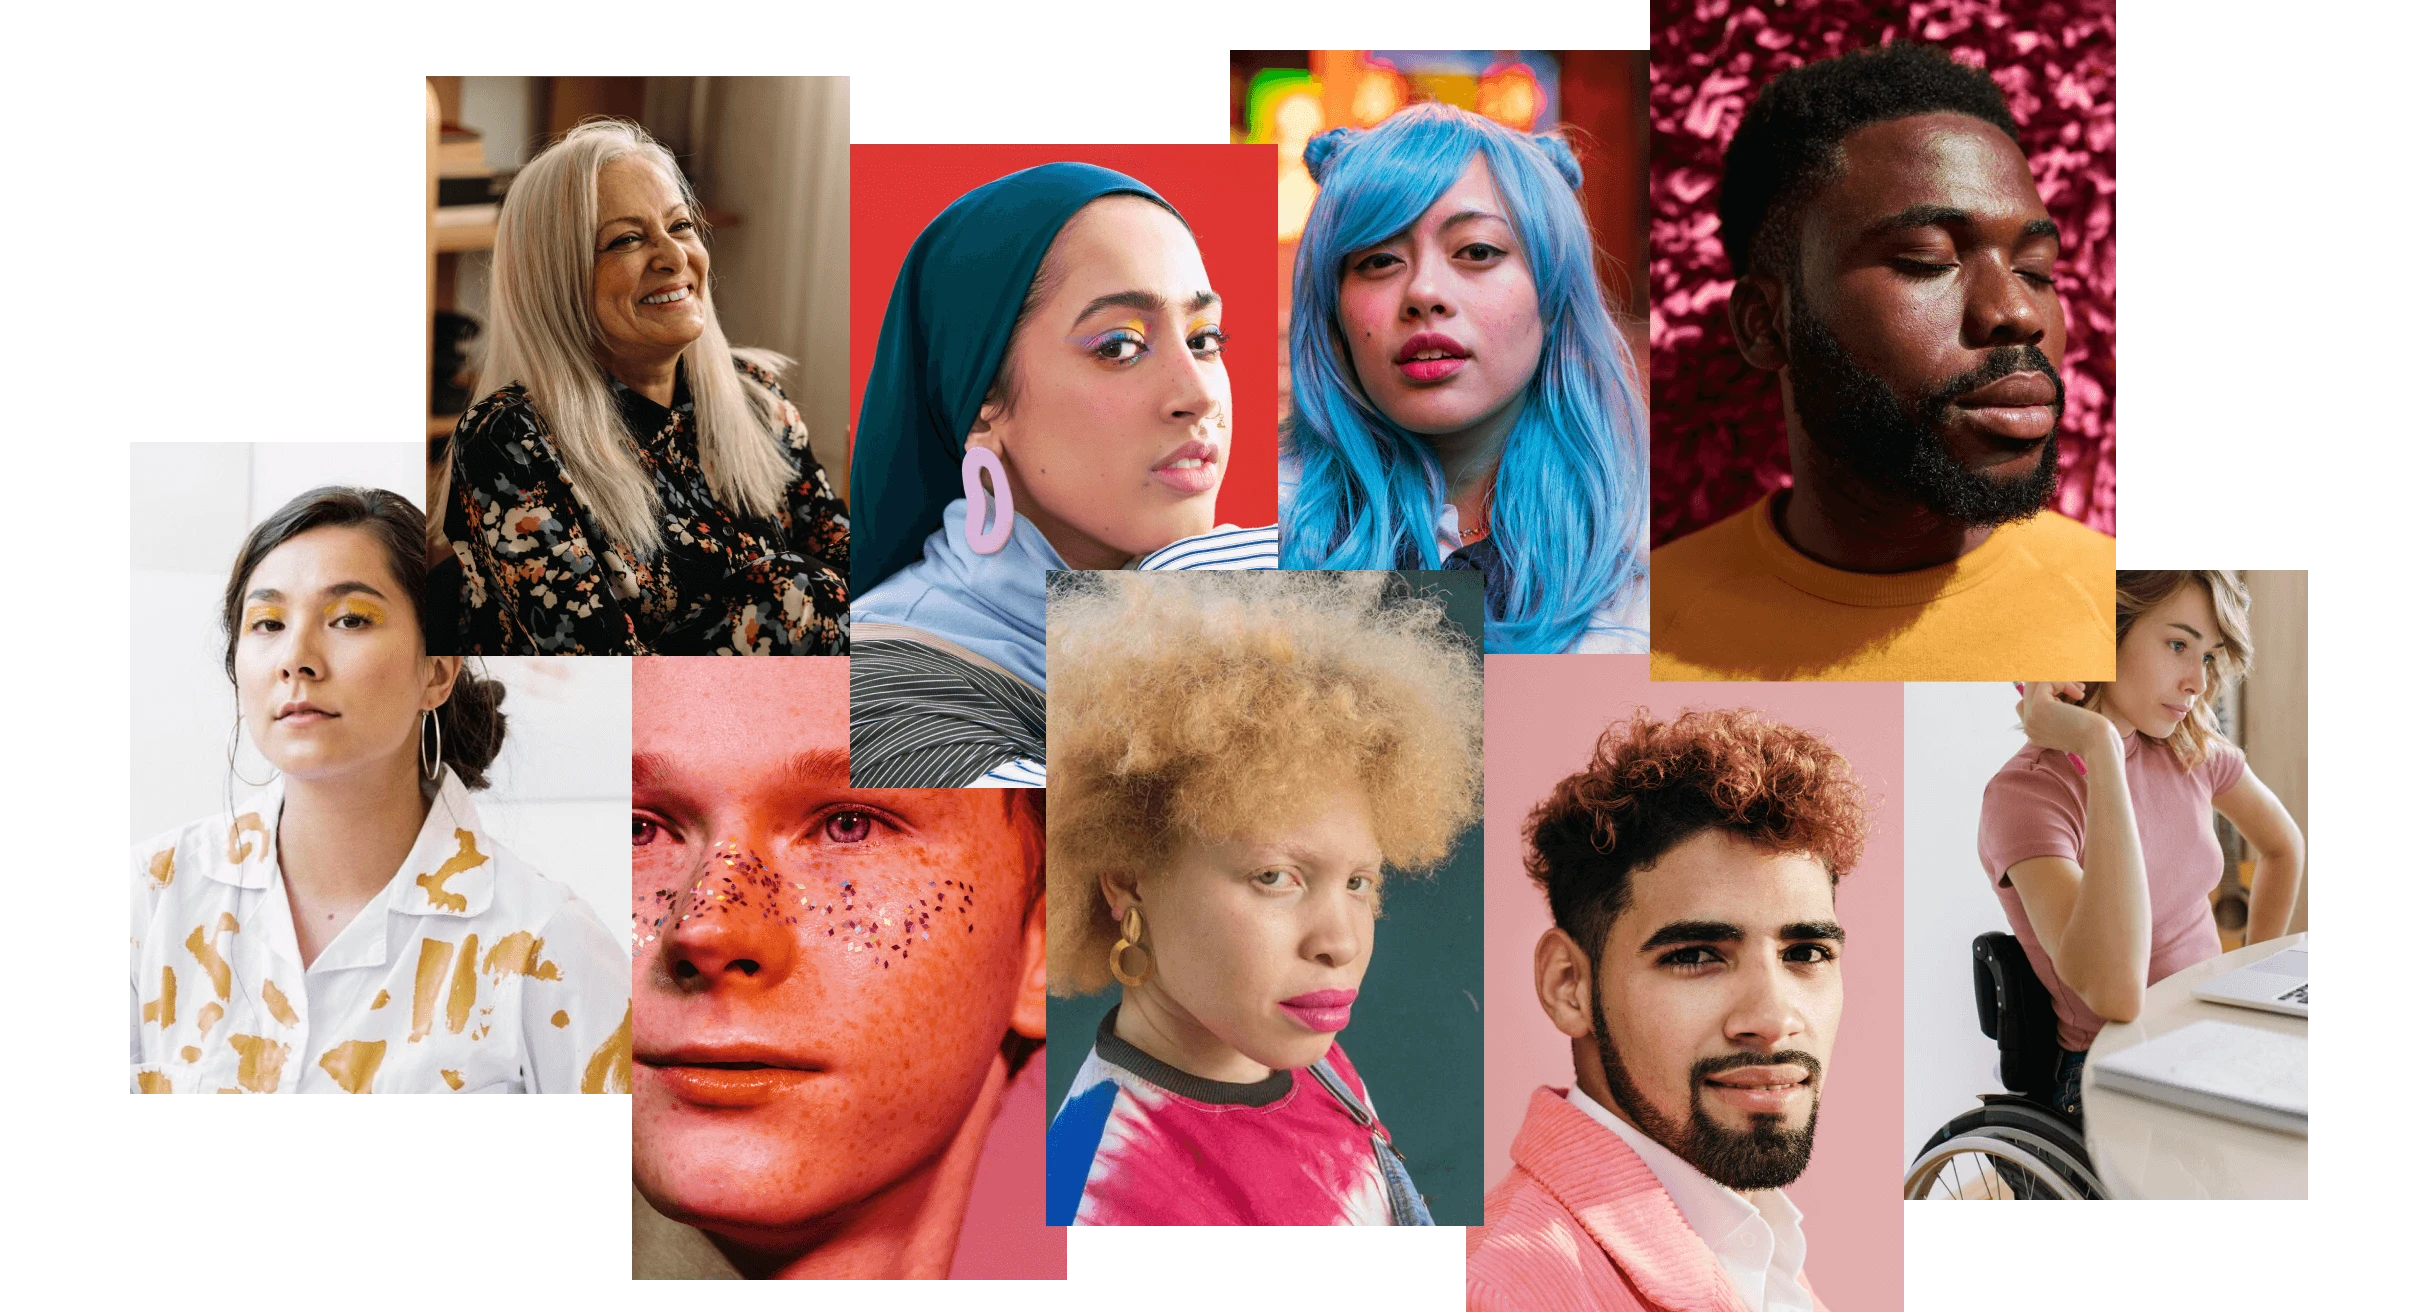 A collage of people of different races dressed in bold styles and colors